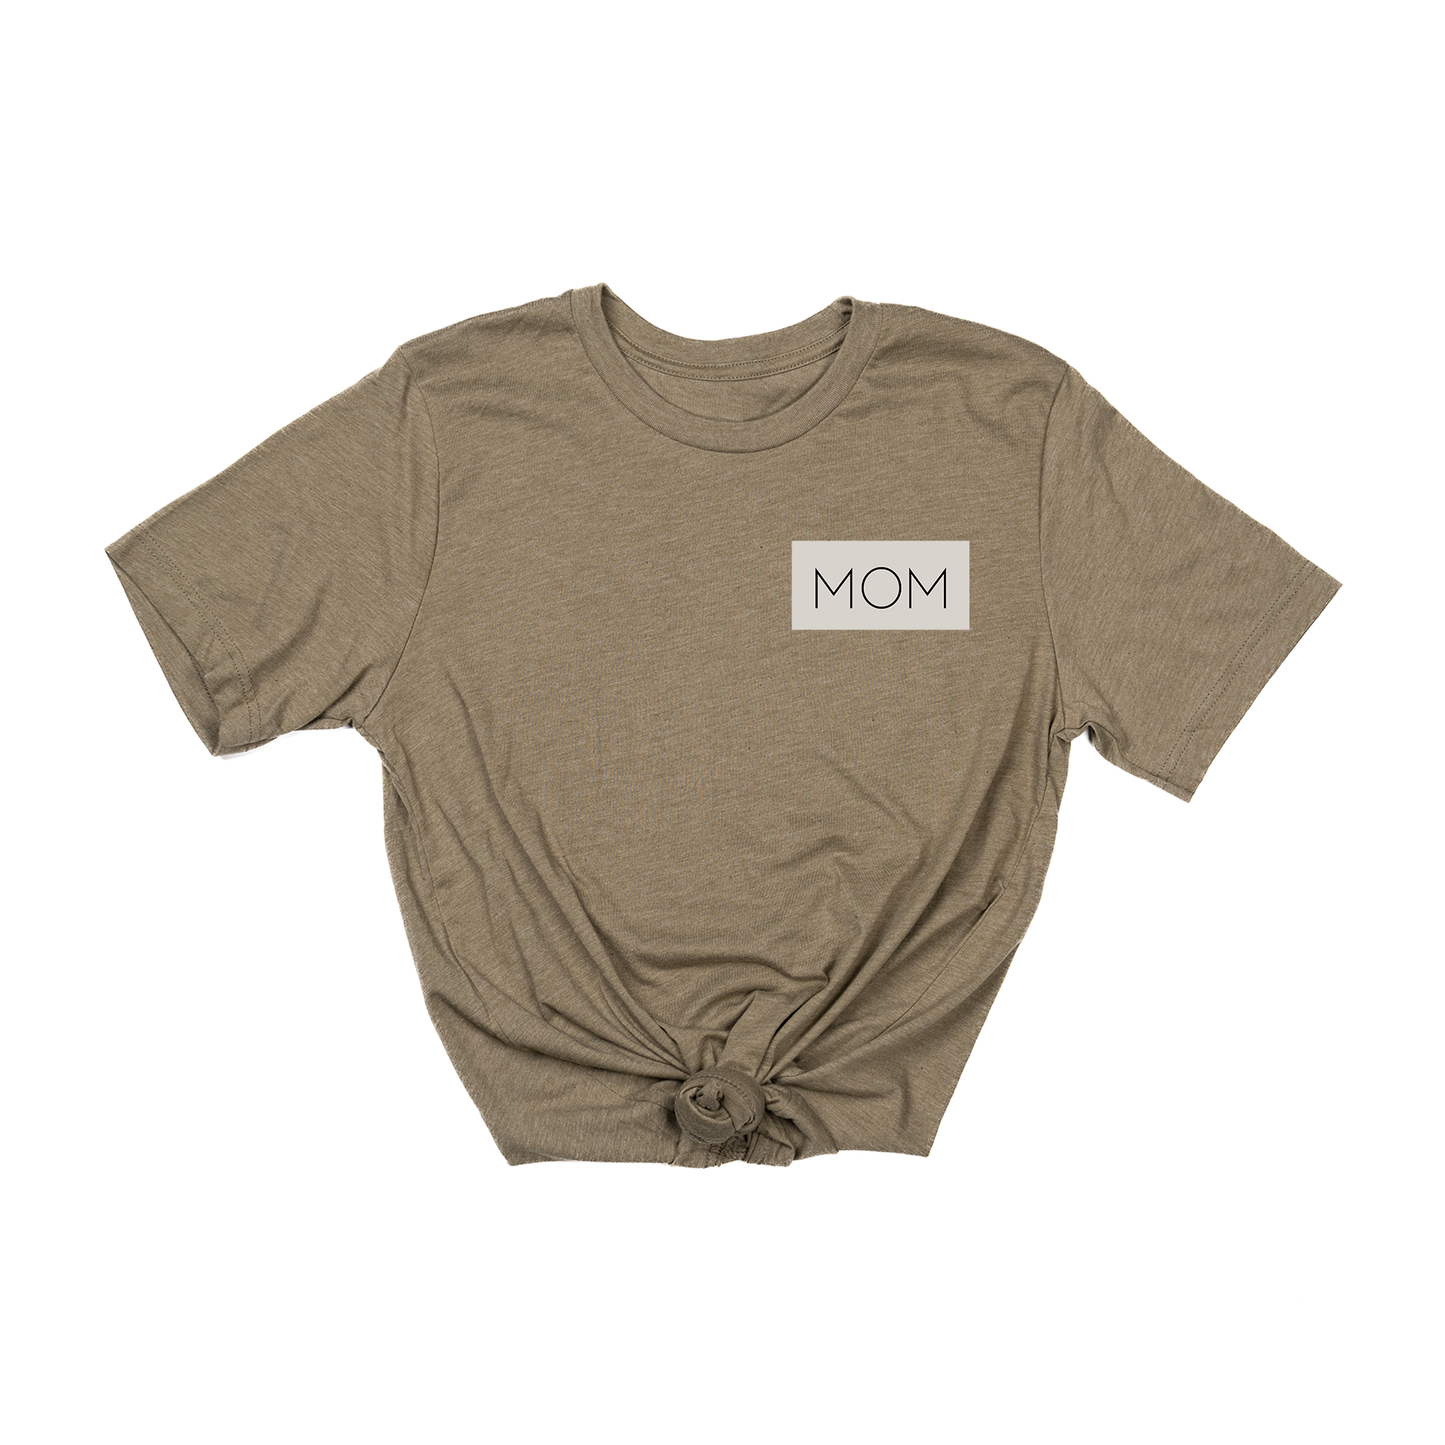 Mom (Boxed Collection, Pocket, Stone Box/Black Text) - Tee (Olive)